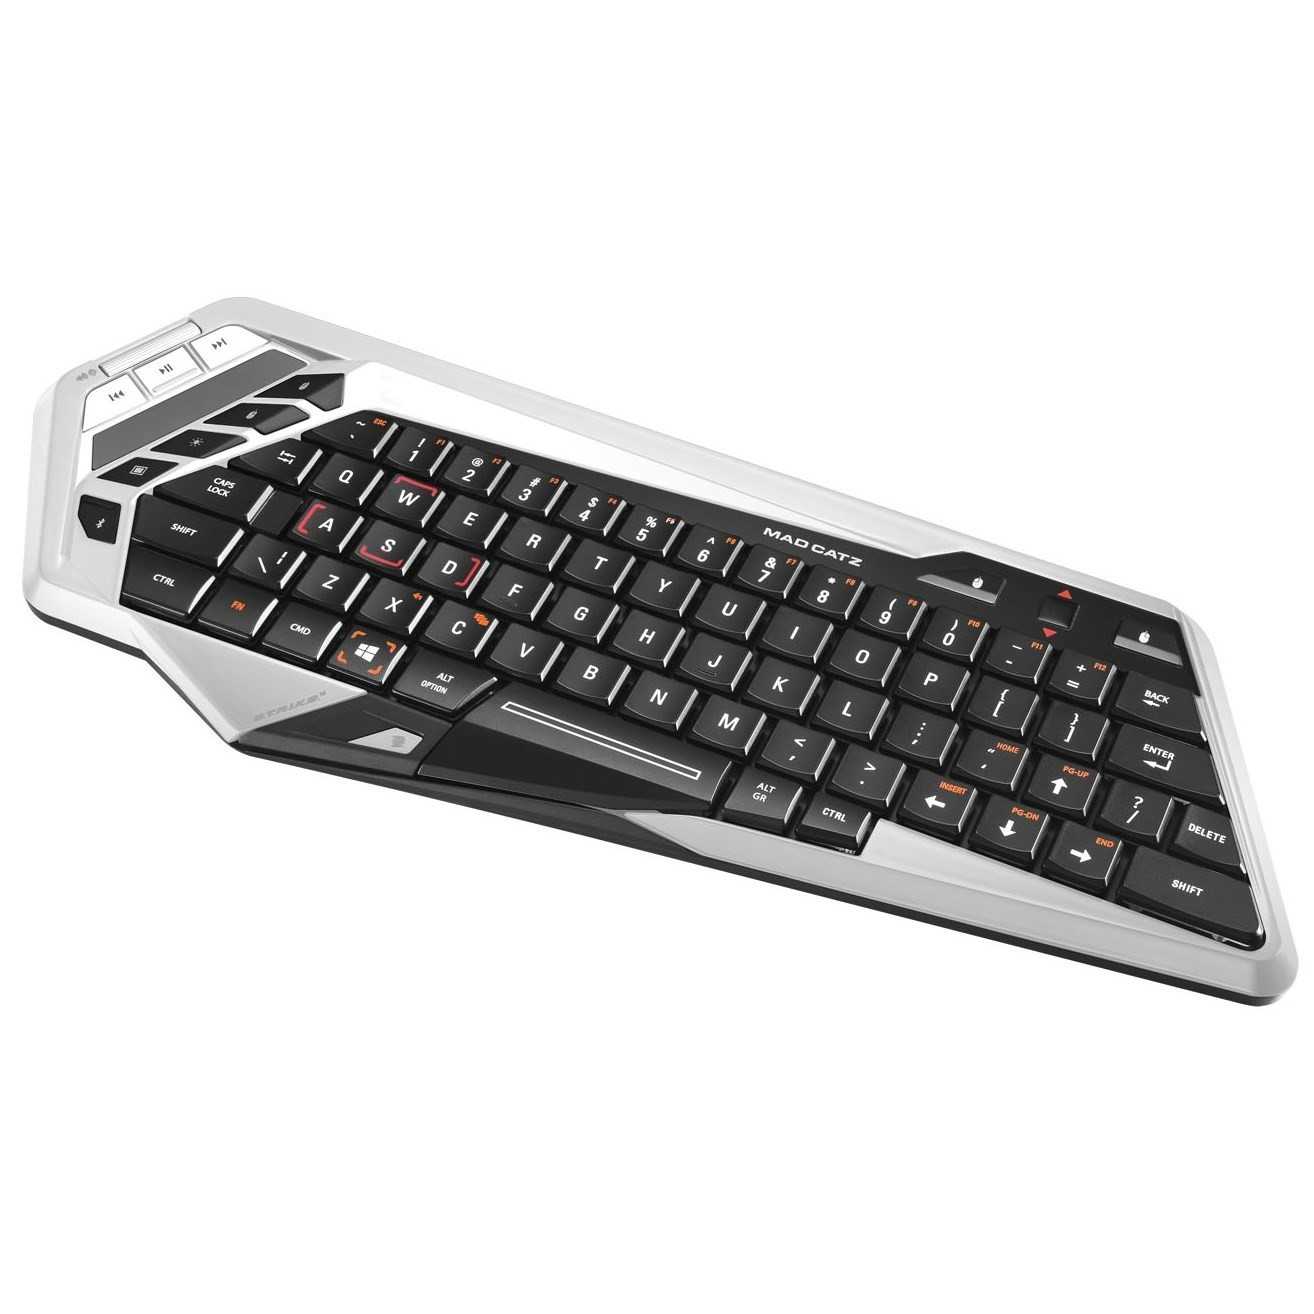 Mad catz s.t.r.i.k.e. 3 gaming keyboard red usb